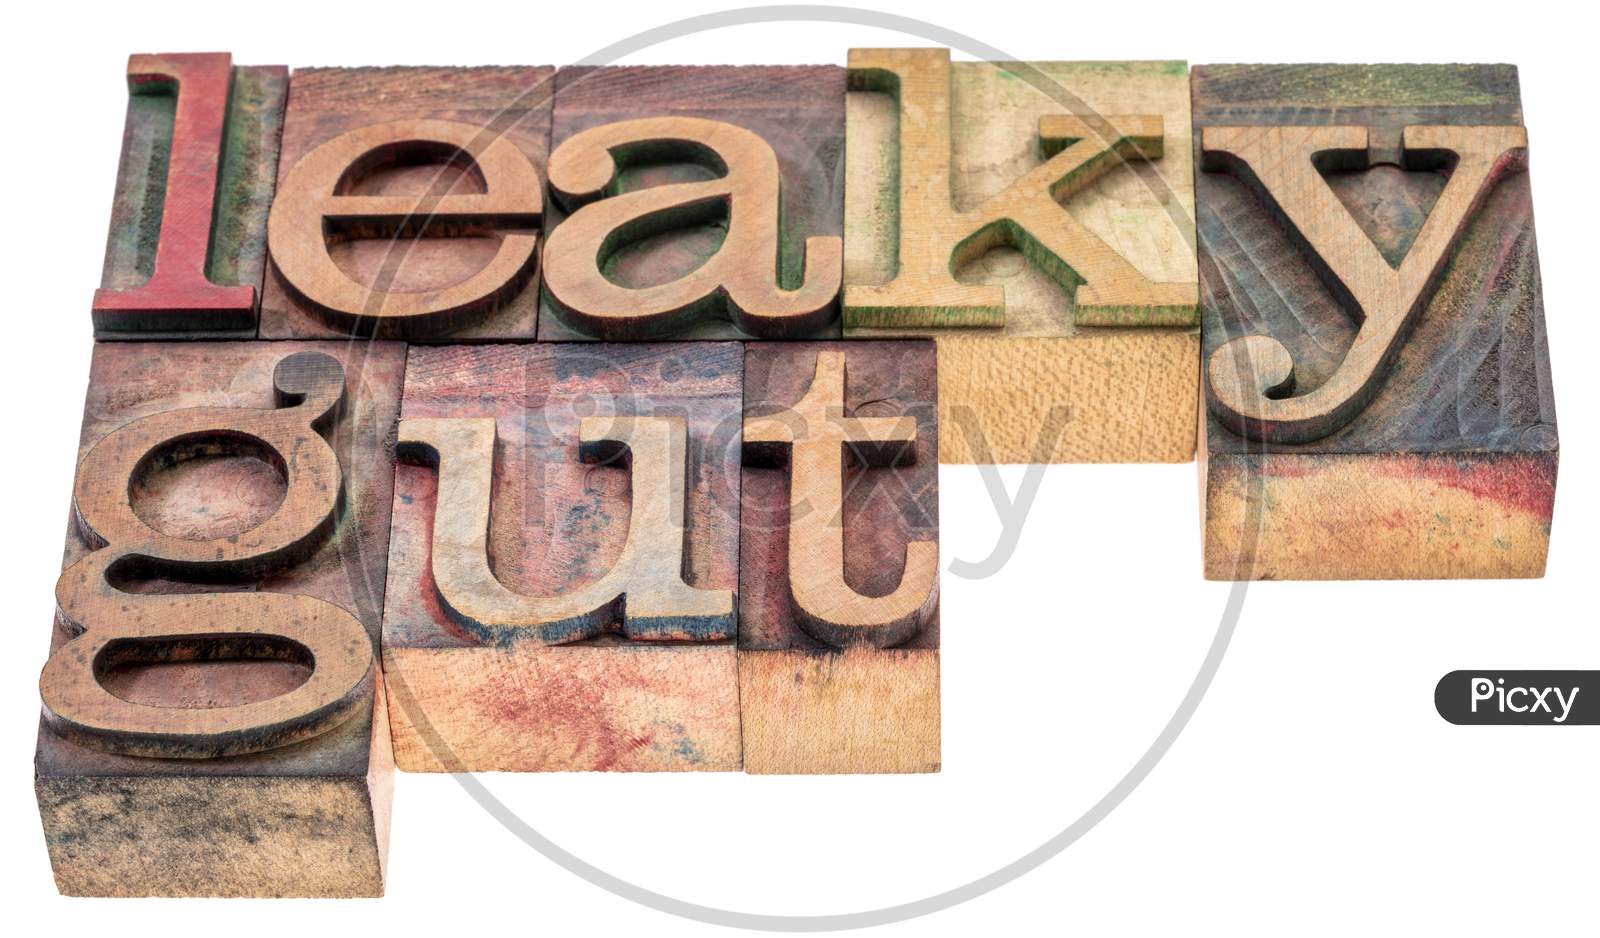 Leaky Gut - Isolated Word Abstract In Vintage Letterpress Wood Type Printing Blocks, Digestive Health Concept